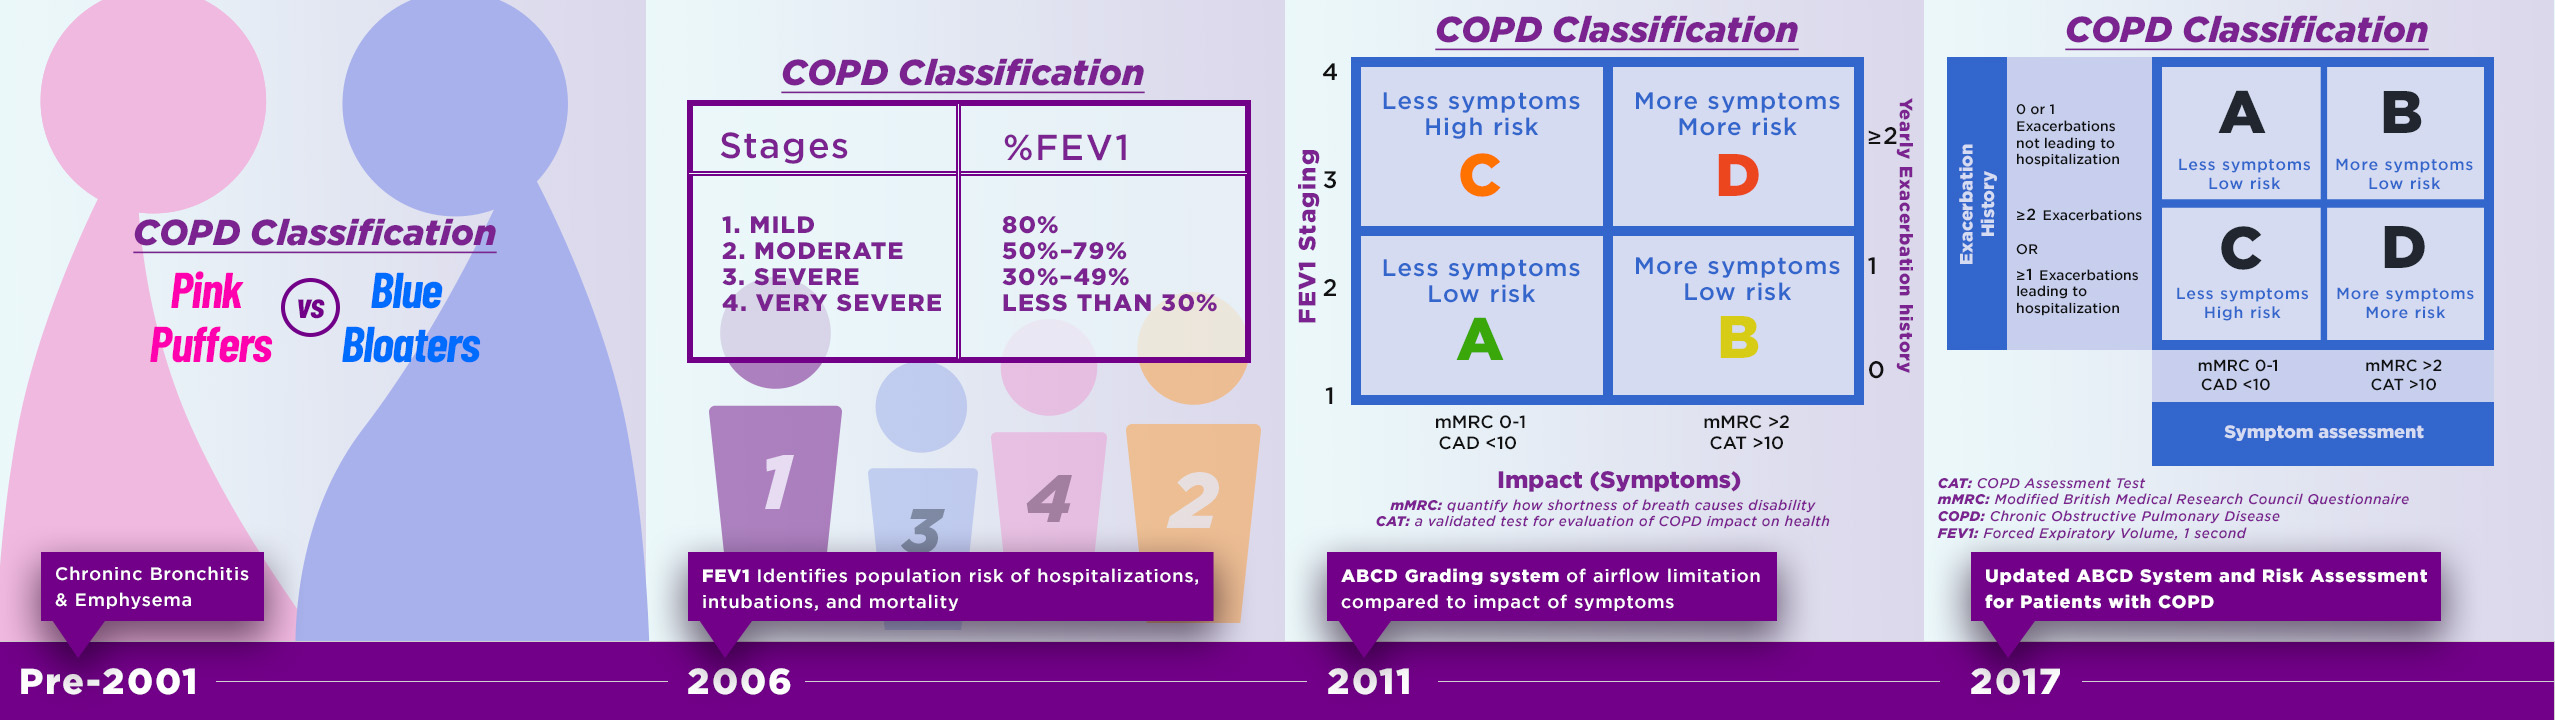 Core IM Mind the Gap on COPD Classifications Clinical Correlations